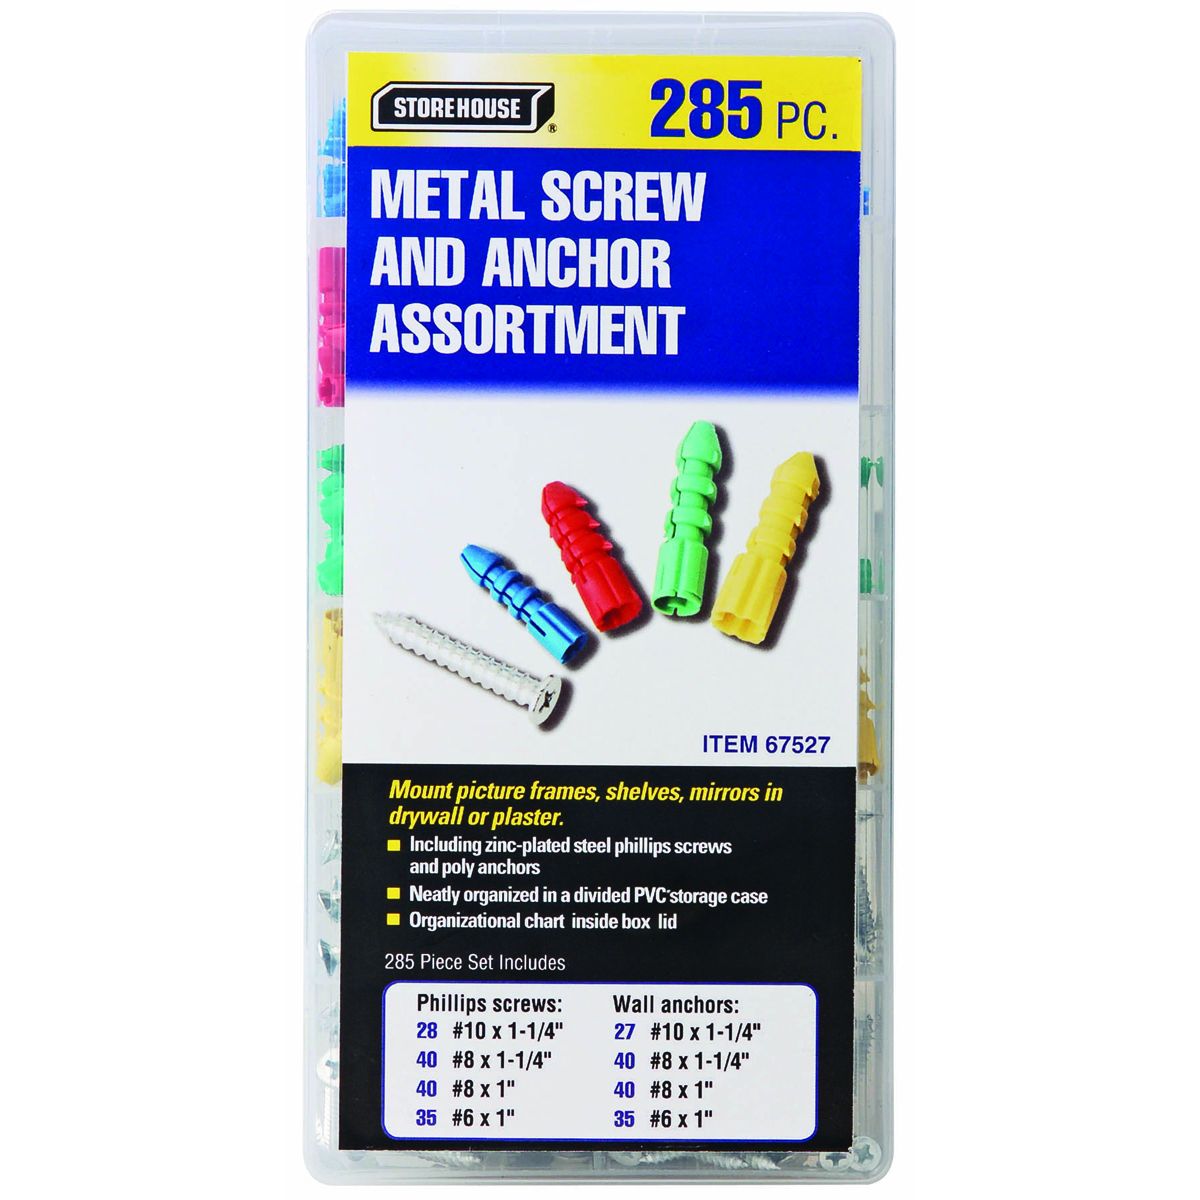 STOREHOUSE 285 Piece Metal Screw and Anchor Assortment Set